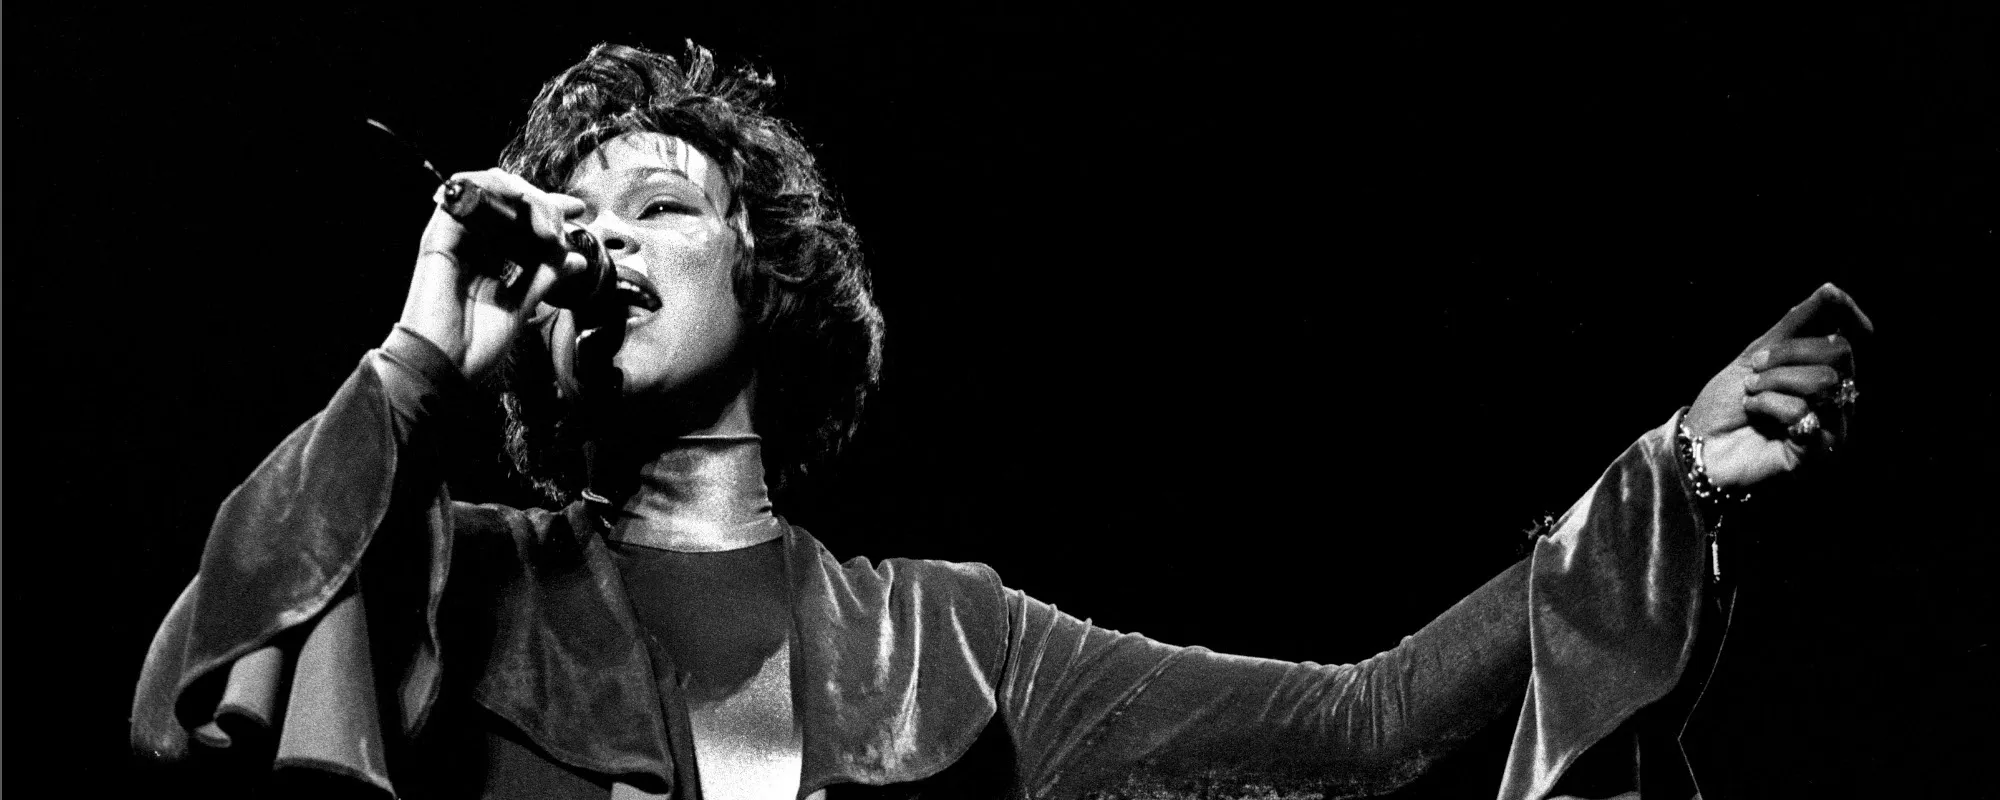 The Meaning Behind the Elvis Presley Inspired Whitney Houston Hit, “I Have Nothing”